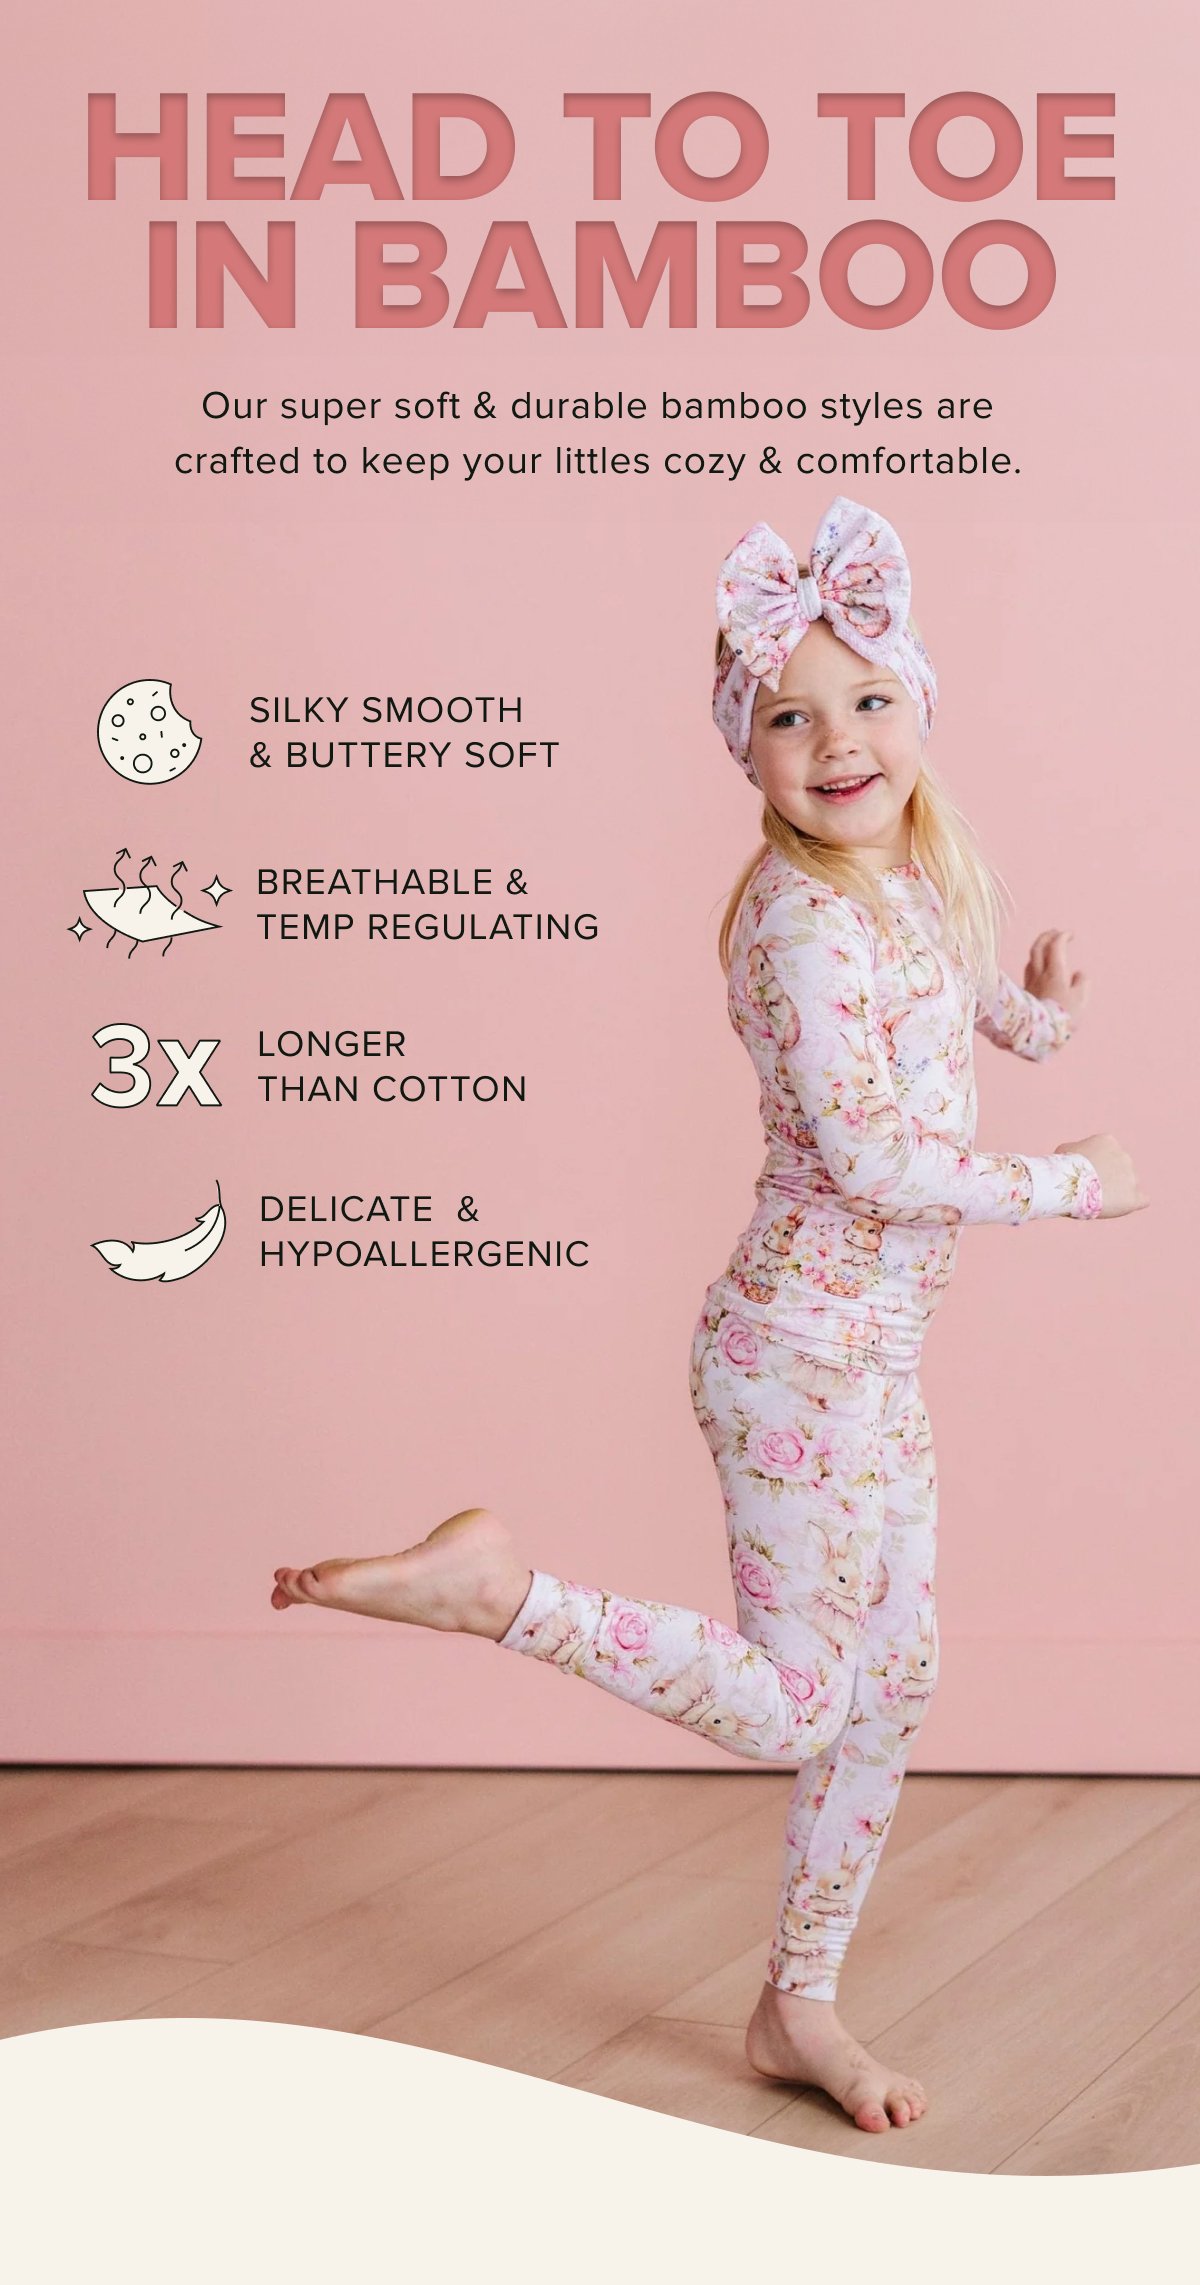 HEAD TO TOE IN BAMBOO Our super soft & durable bamboo styles are crafted to keep your littles cozy & comfortable.